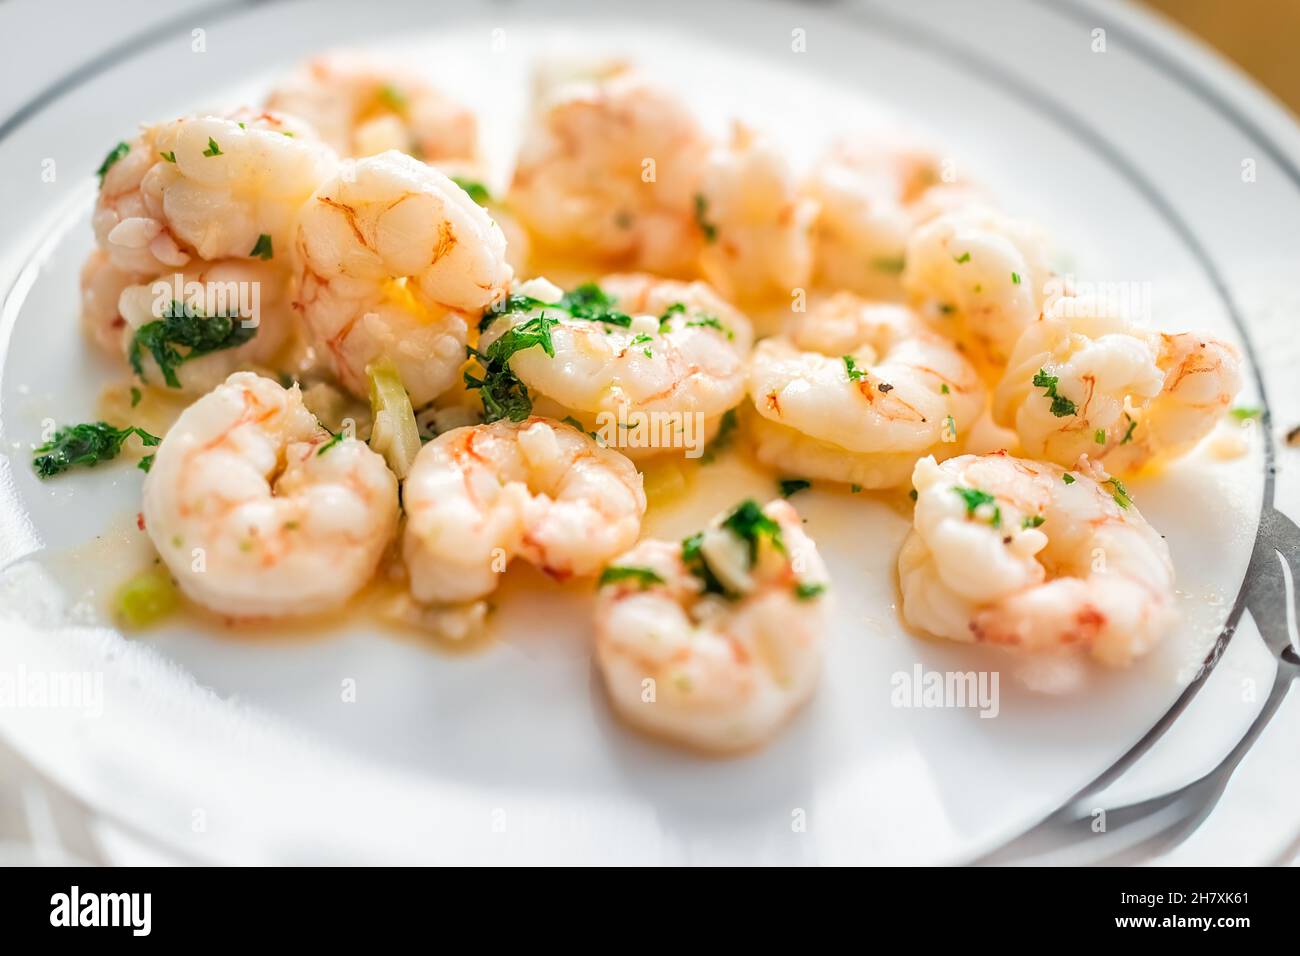 Macro closeup of cooked whole large Argentinian fried shrimp seafood with garlic butter and parsley herb on white plate serving dinner Stock Photo